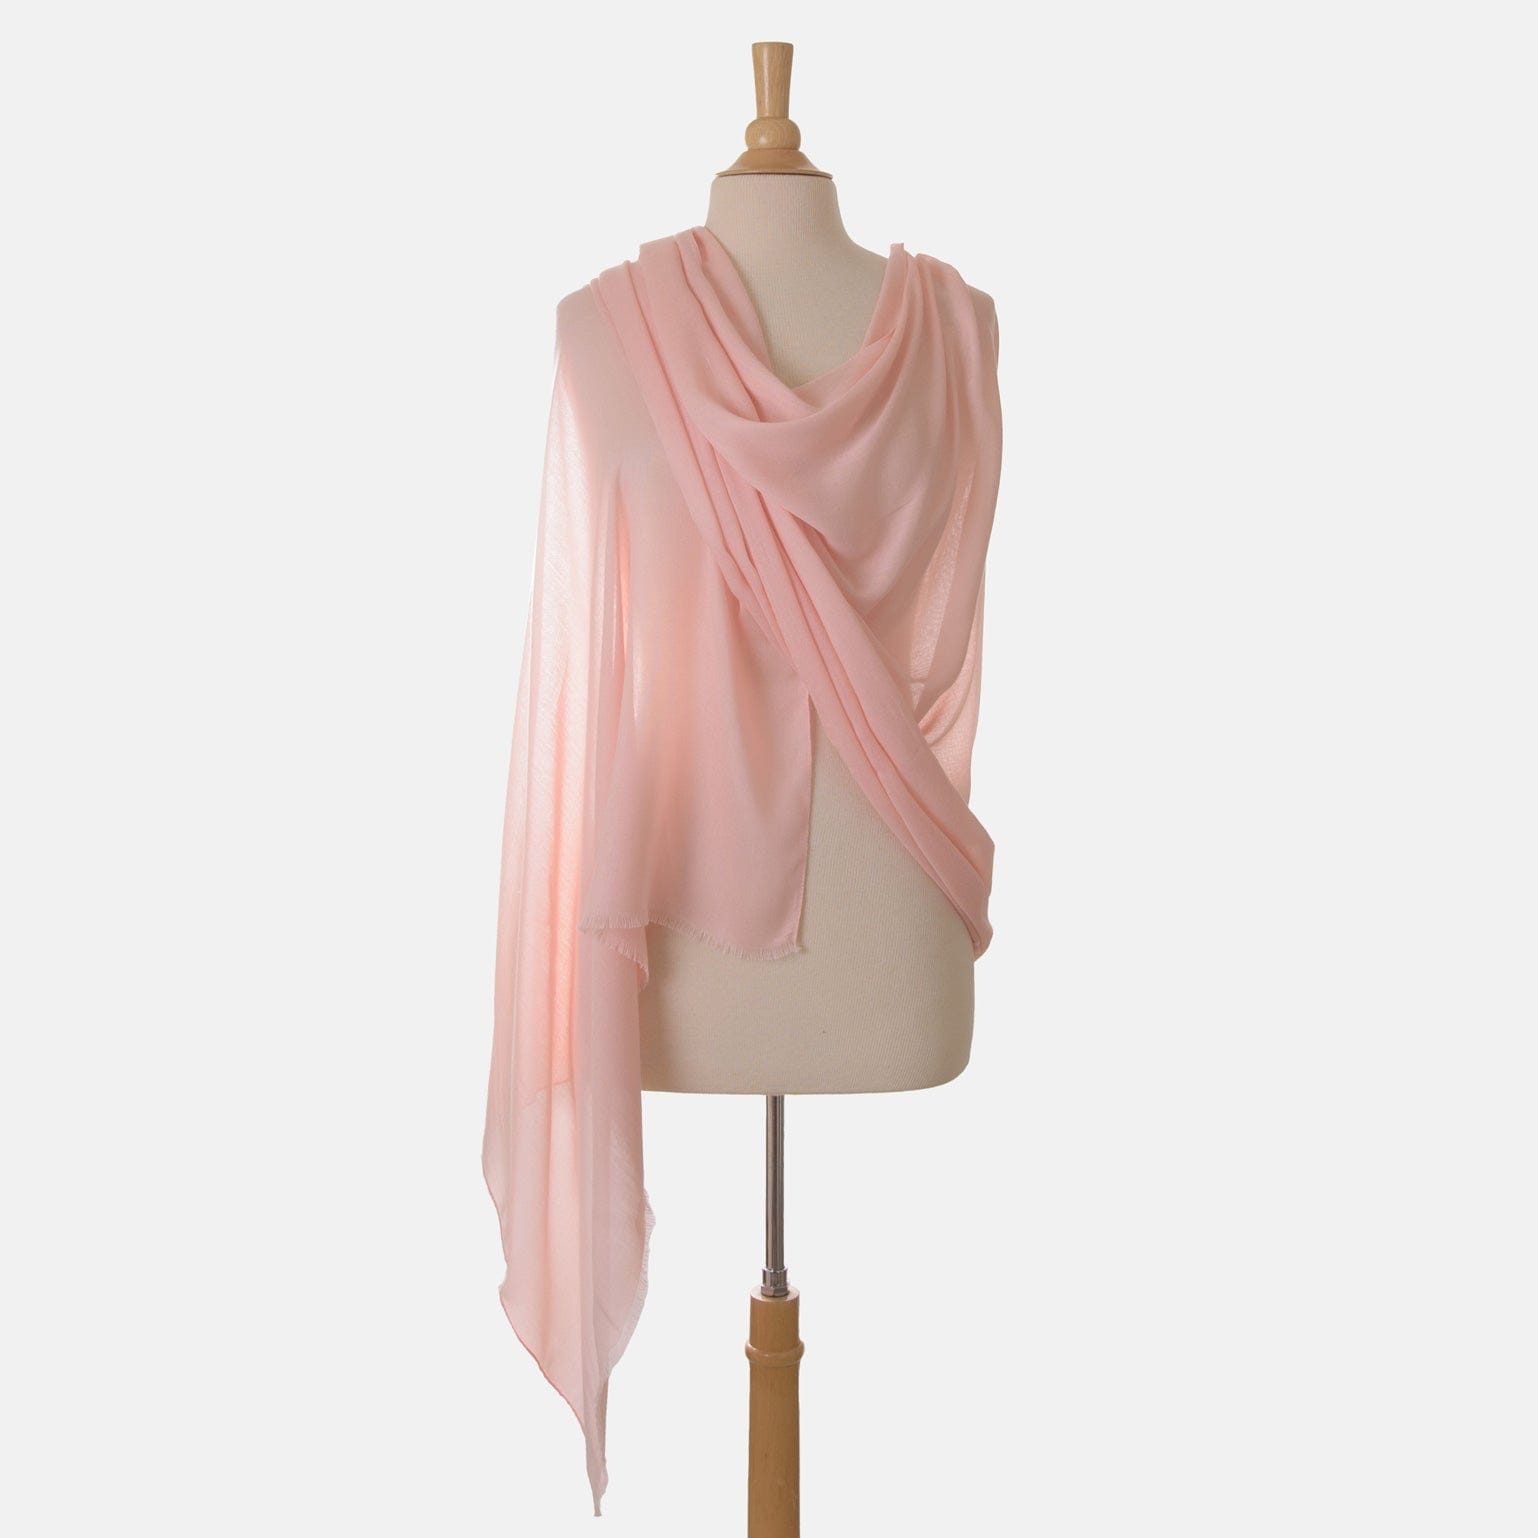 Women's Extra Large Modal Scarf - Pink